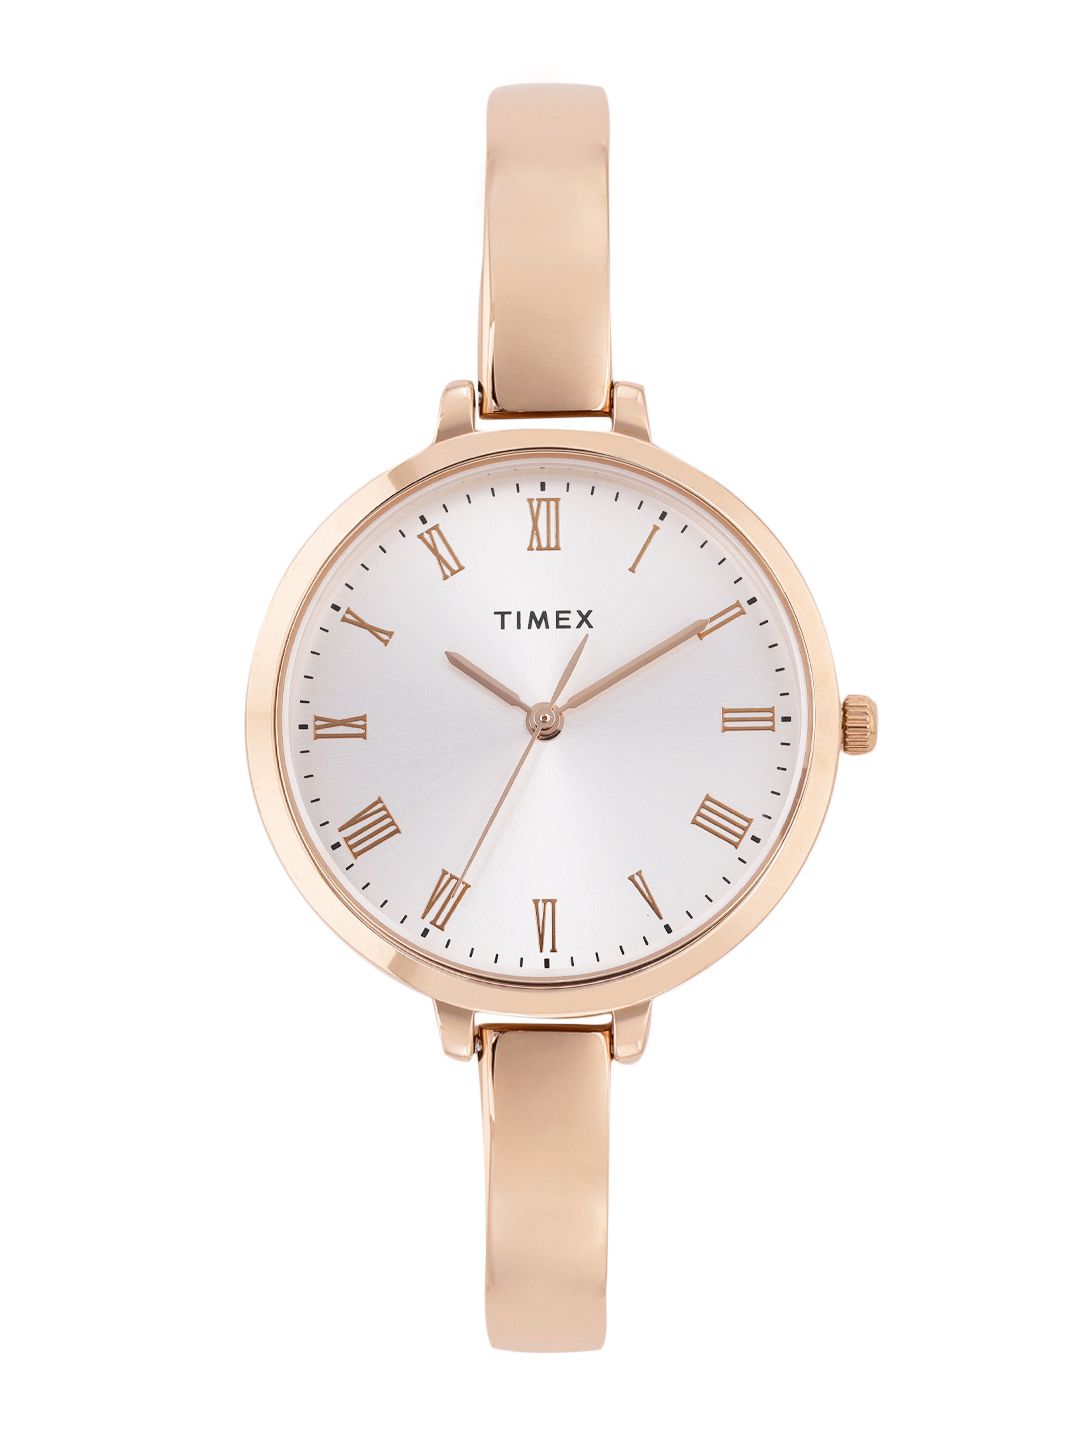 Timex Women Silver-Toned Solid Bracelet Style Analogue Watch TWEL12817 Price in India